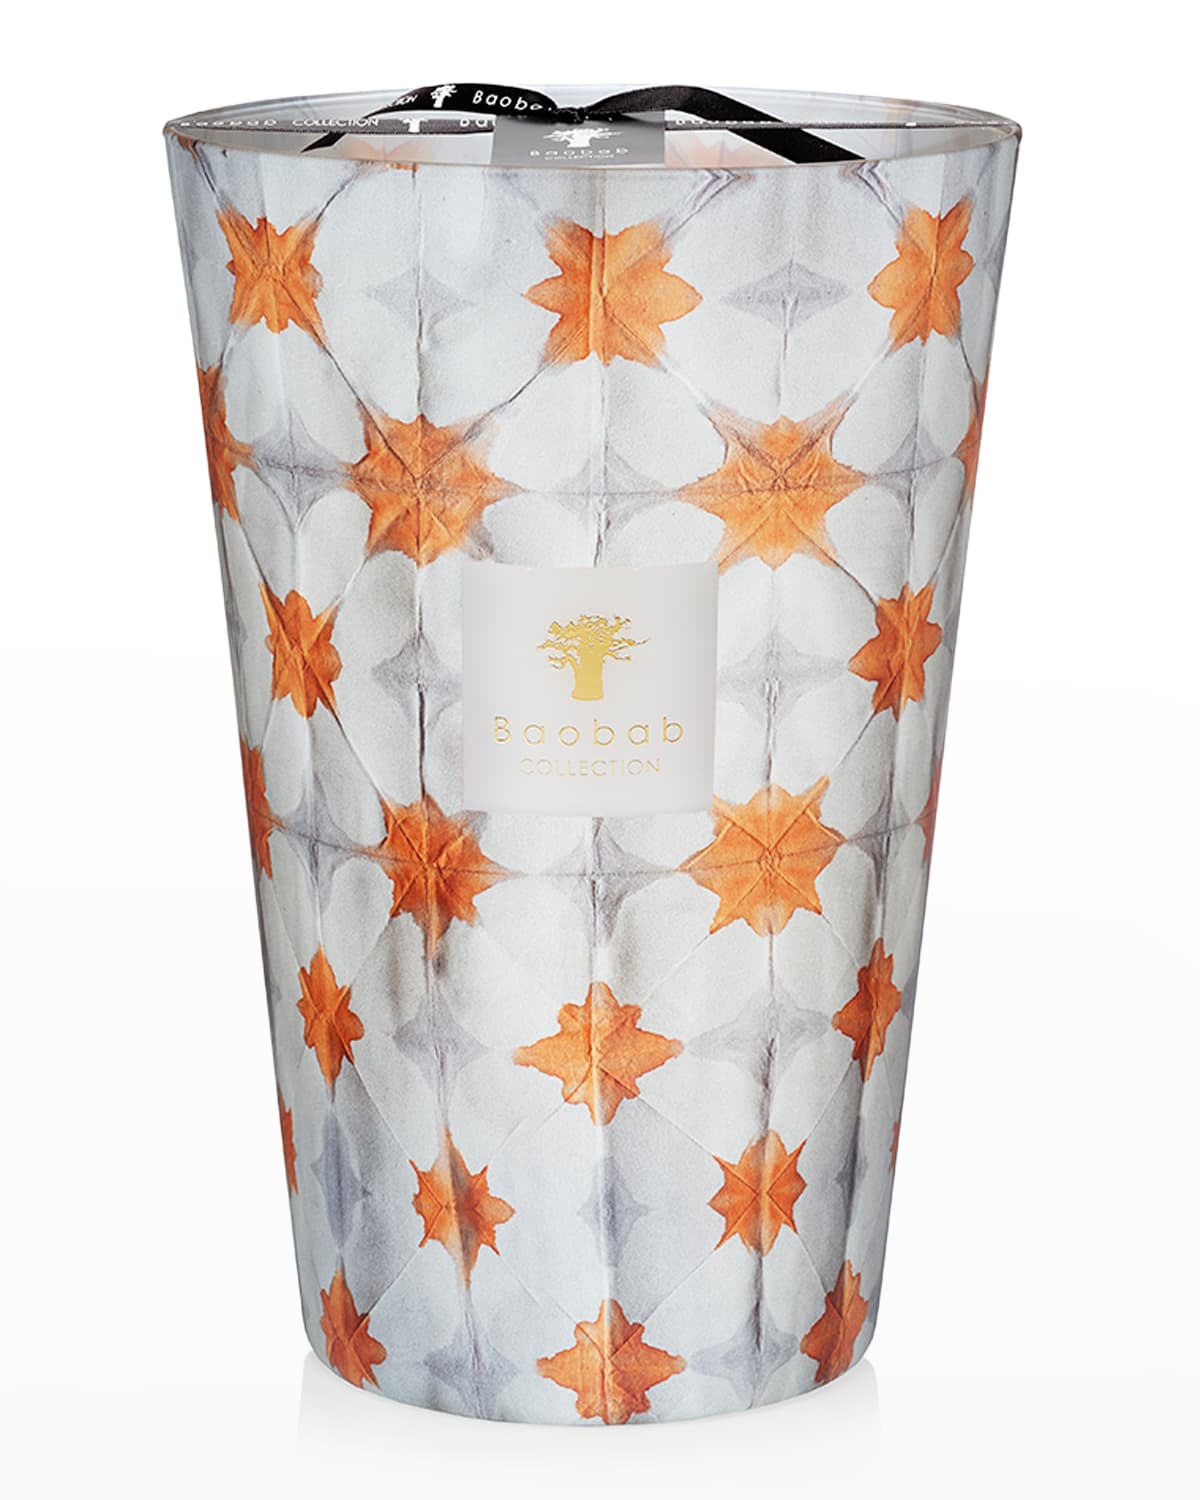 Baobab Collection 10 Kg Odyssee Calypso Max35 Candle In White And Orange